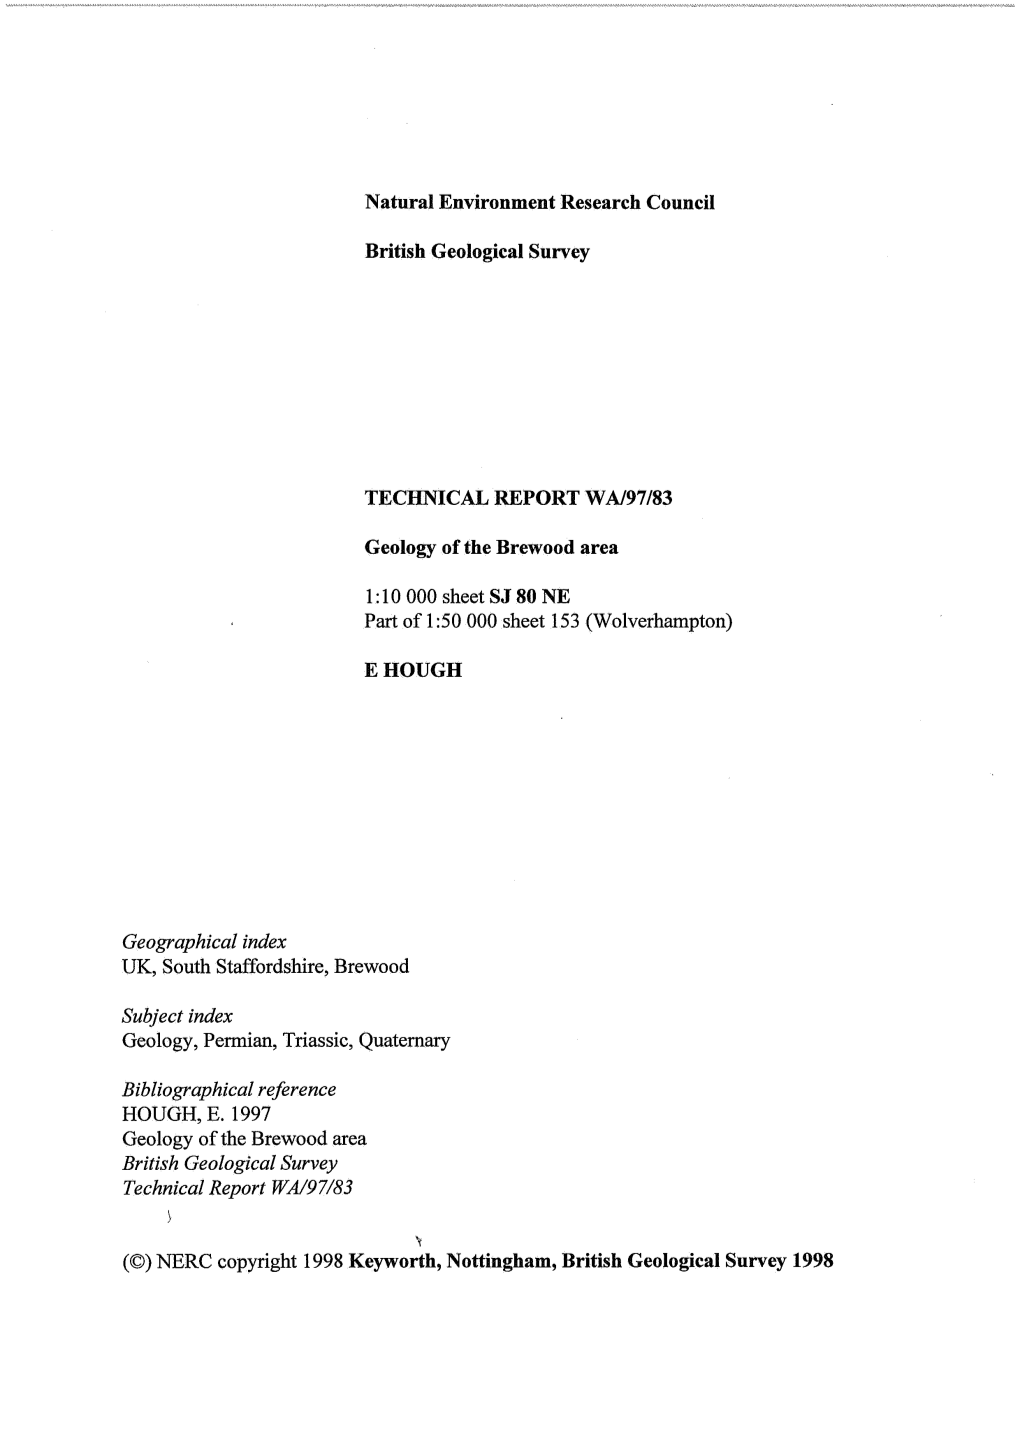 Natural Environment Research Council British Geological Survey TECHNICAL REPORT WA/97/83 Geology of the Brewood Area 1 : 10